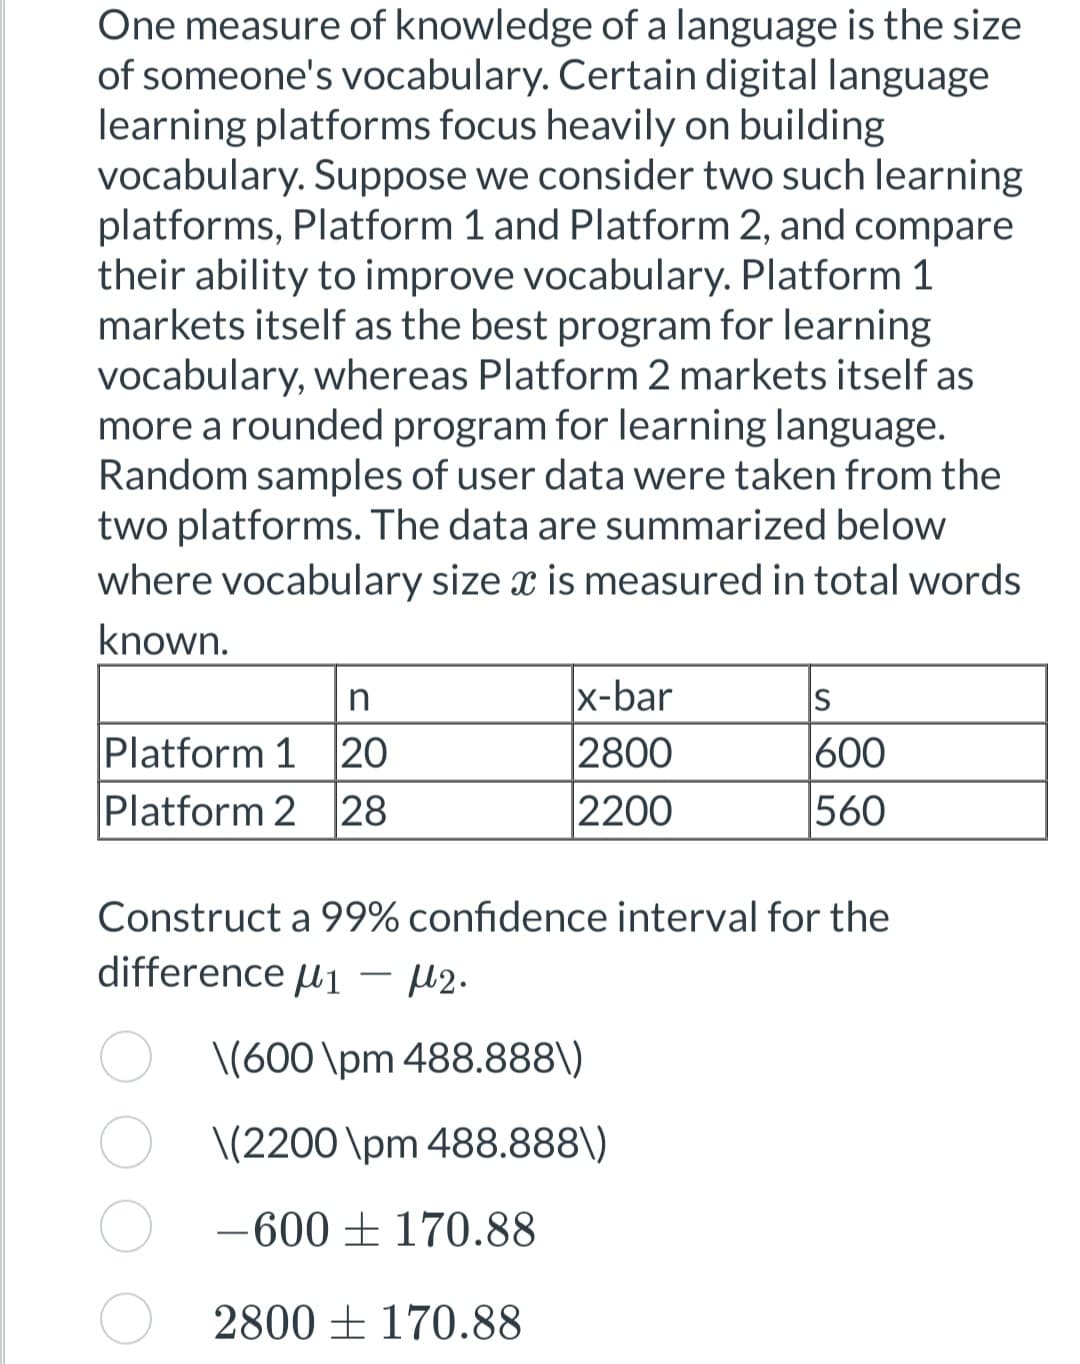 One measure of knowledge of a language is the size
of someone's vocabulary. Certain digital language
learning platforms focus heavily on building
vocabulary. Suppose we consider two such learning
platforms, Platform 1 and Platform 2, and compare
their ability to improve vocabulary. Platform 1
markets itself as the best program for learning
vocabulary, whereas Platform 2 markets itself as
more a rounded program for learning language.
Random samples of user data were taken from the
two platforms. The data are summarized below
where vocabulary size x is measured in total words
known.
n
Platform 1 20
Platform 2 28
x-bar
2800
2200
S
600
560
Construct a 99% confidence interval for the
difference 1 - μ2.
\(600 \pm 488.888\)
\(2200 \pm 488.888\)
-600 170.88
2800 170.88